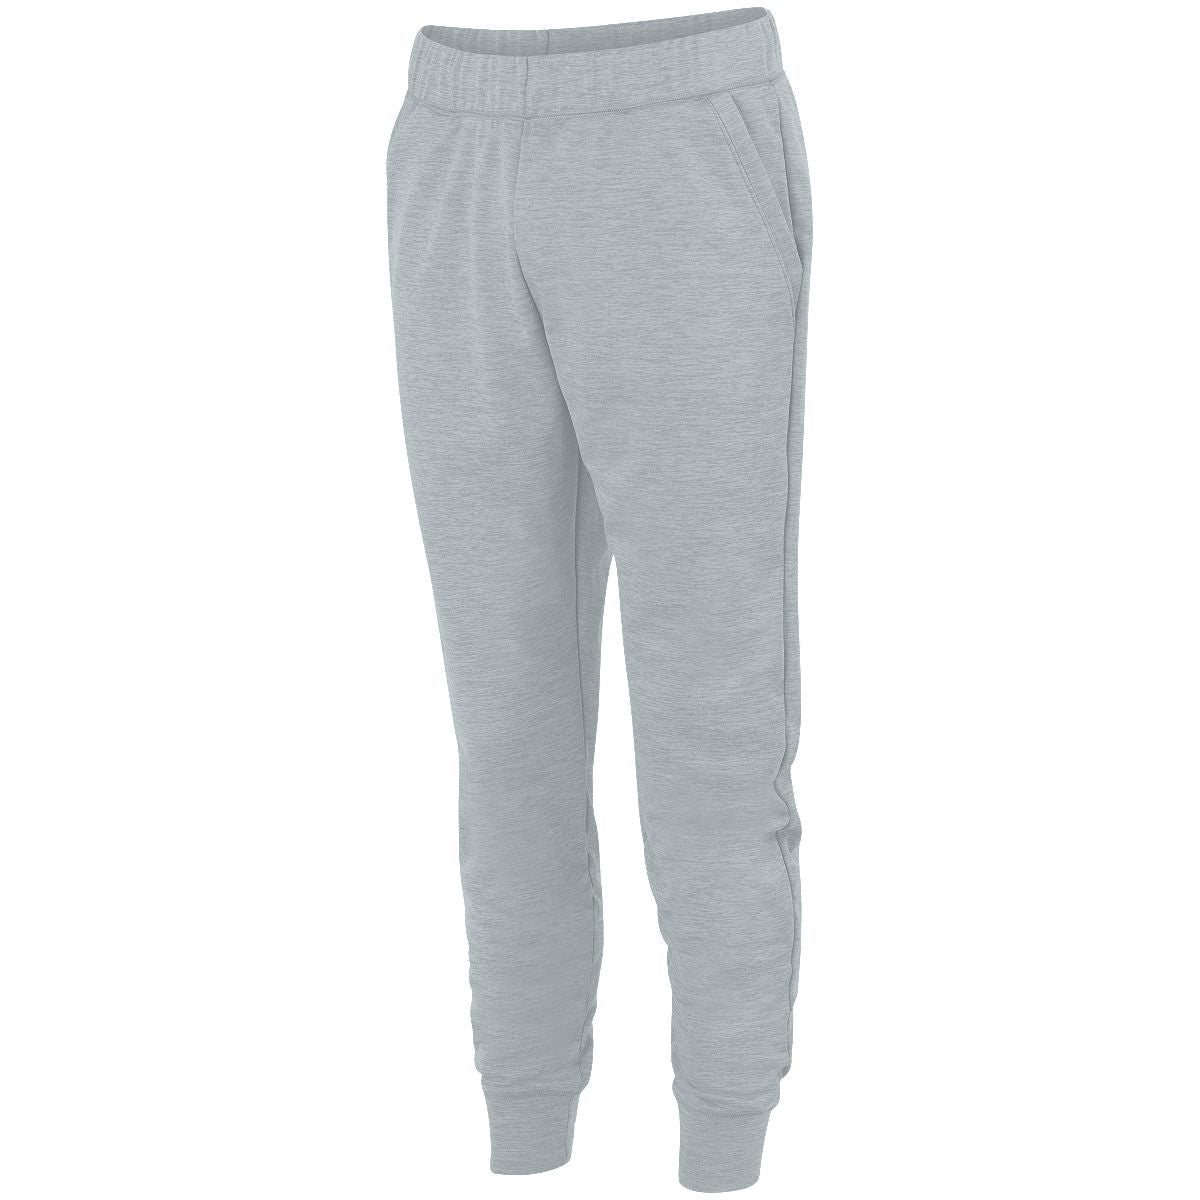 Augusta Sportswear Tonal Heather Fleece Jogger in Silver  -Part of the Adult, Augusta-Products, Tonal-Fleece-Collection product lines at KanaleyCreations.com